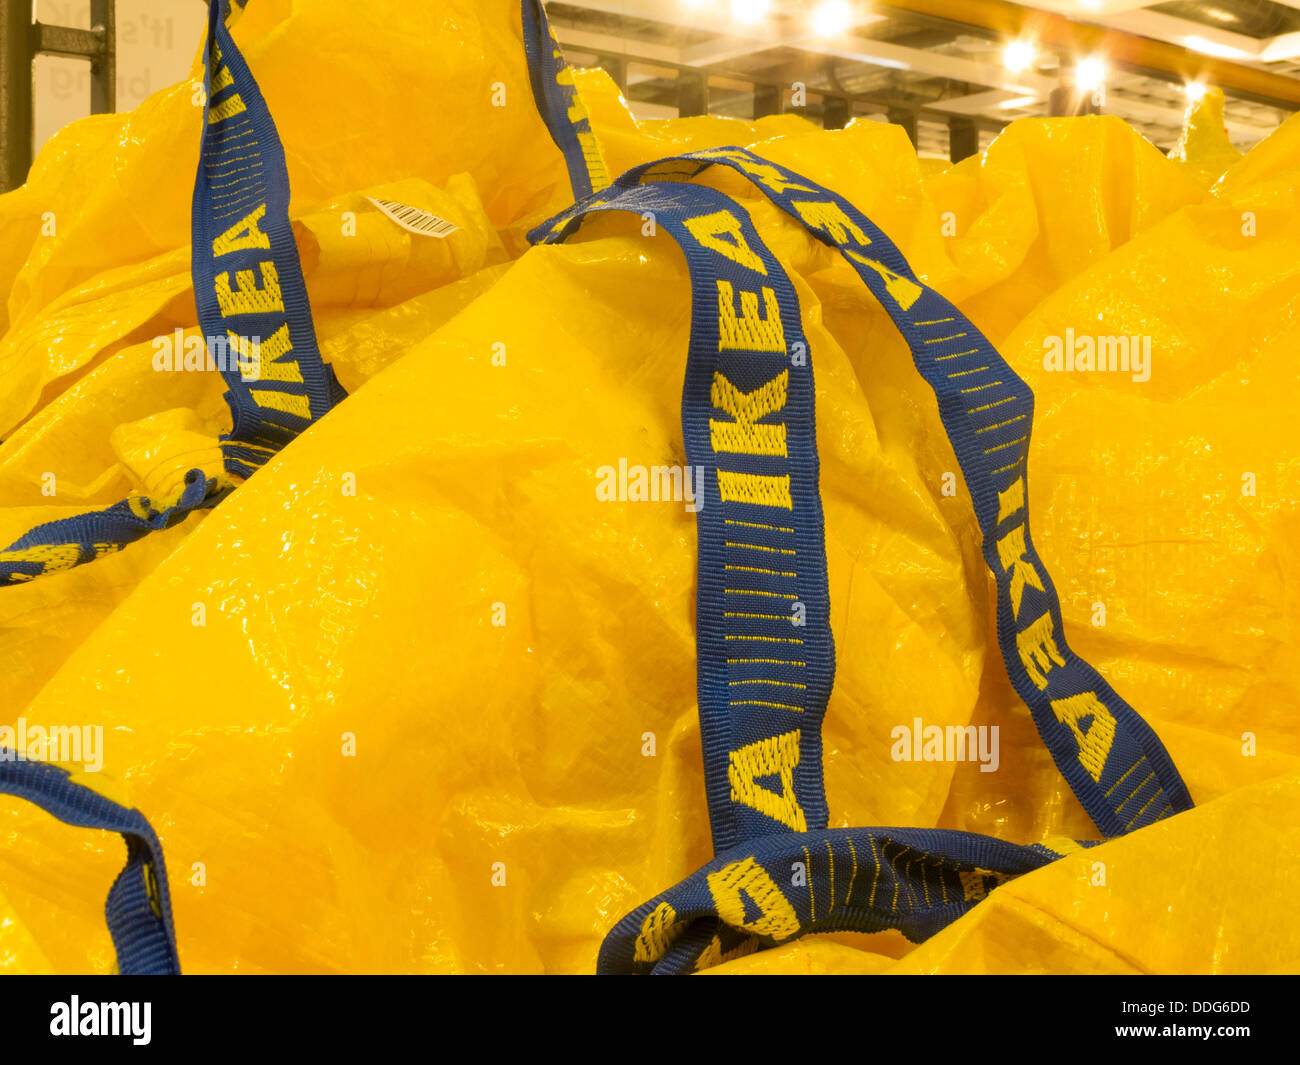 Bright Yellow and Blue Reuseable Shopping bags, IKEA Swedish Retail Store Interior, Stoughton, NA Stock Photo